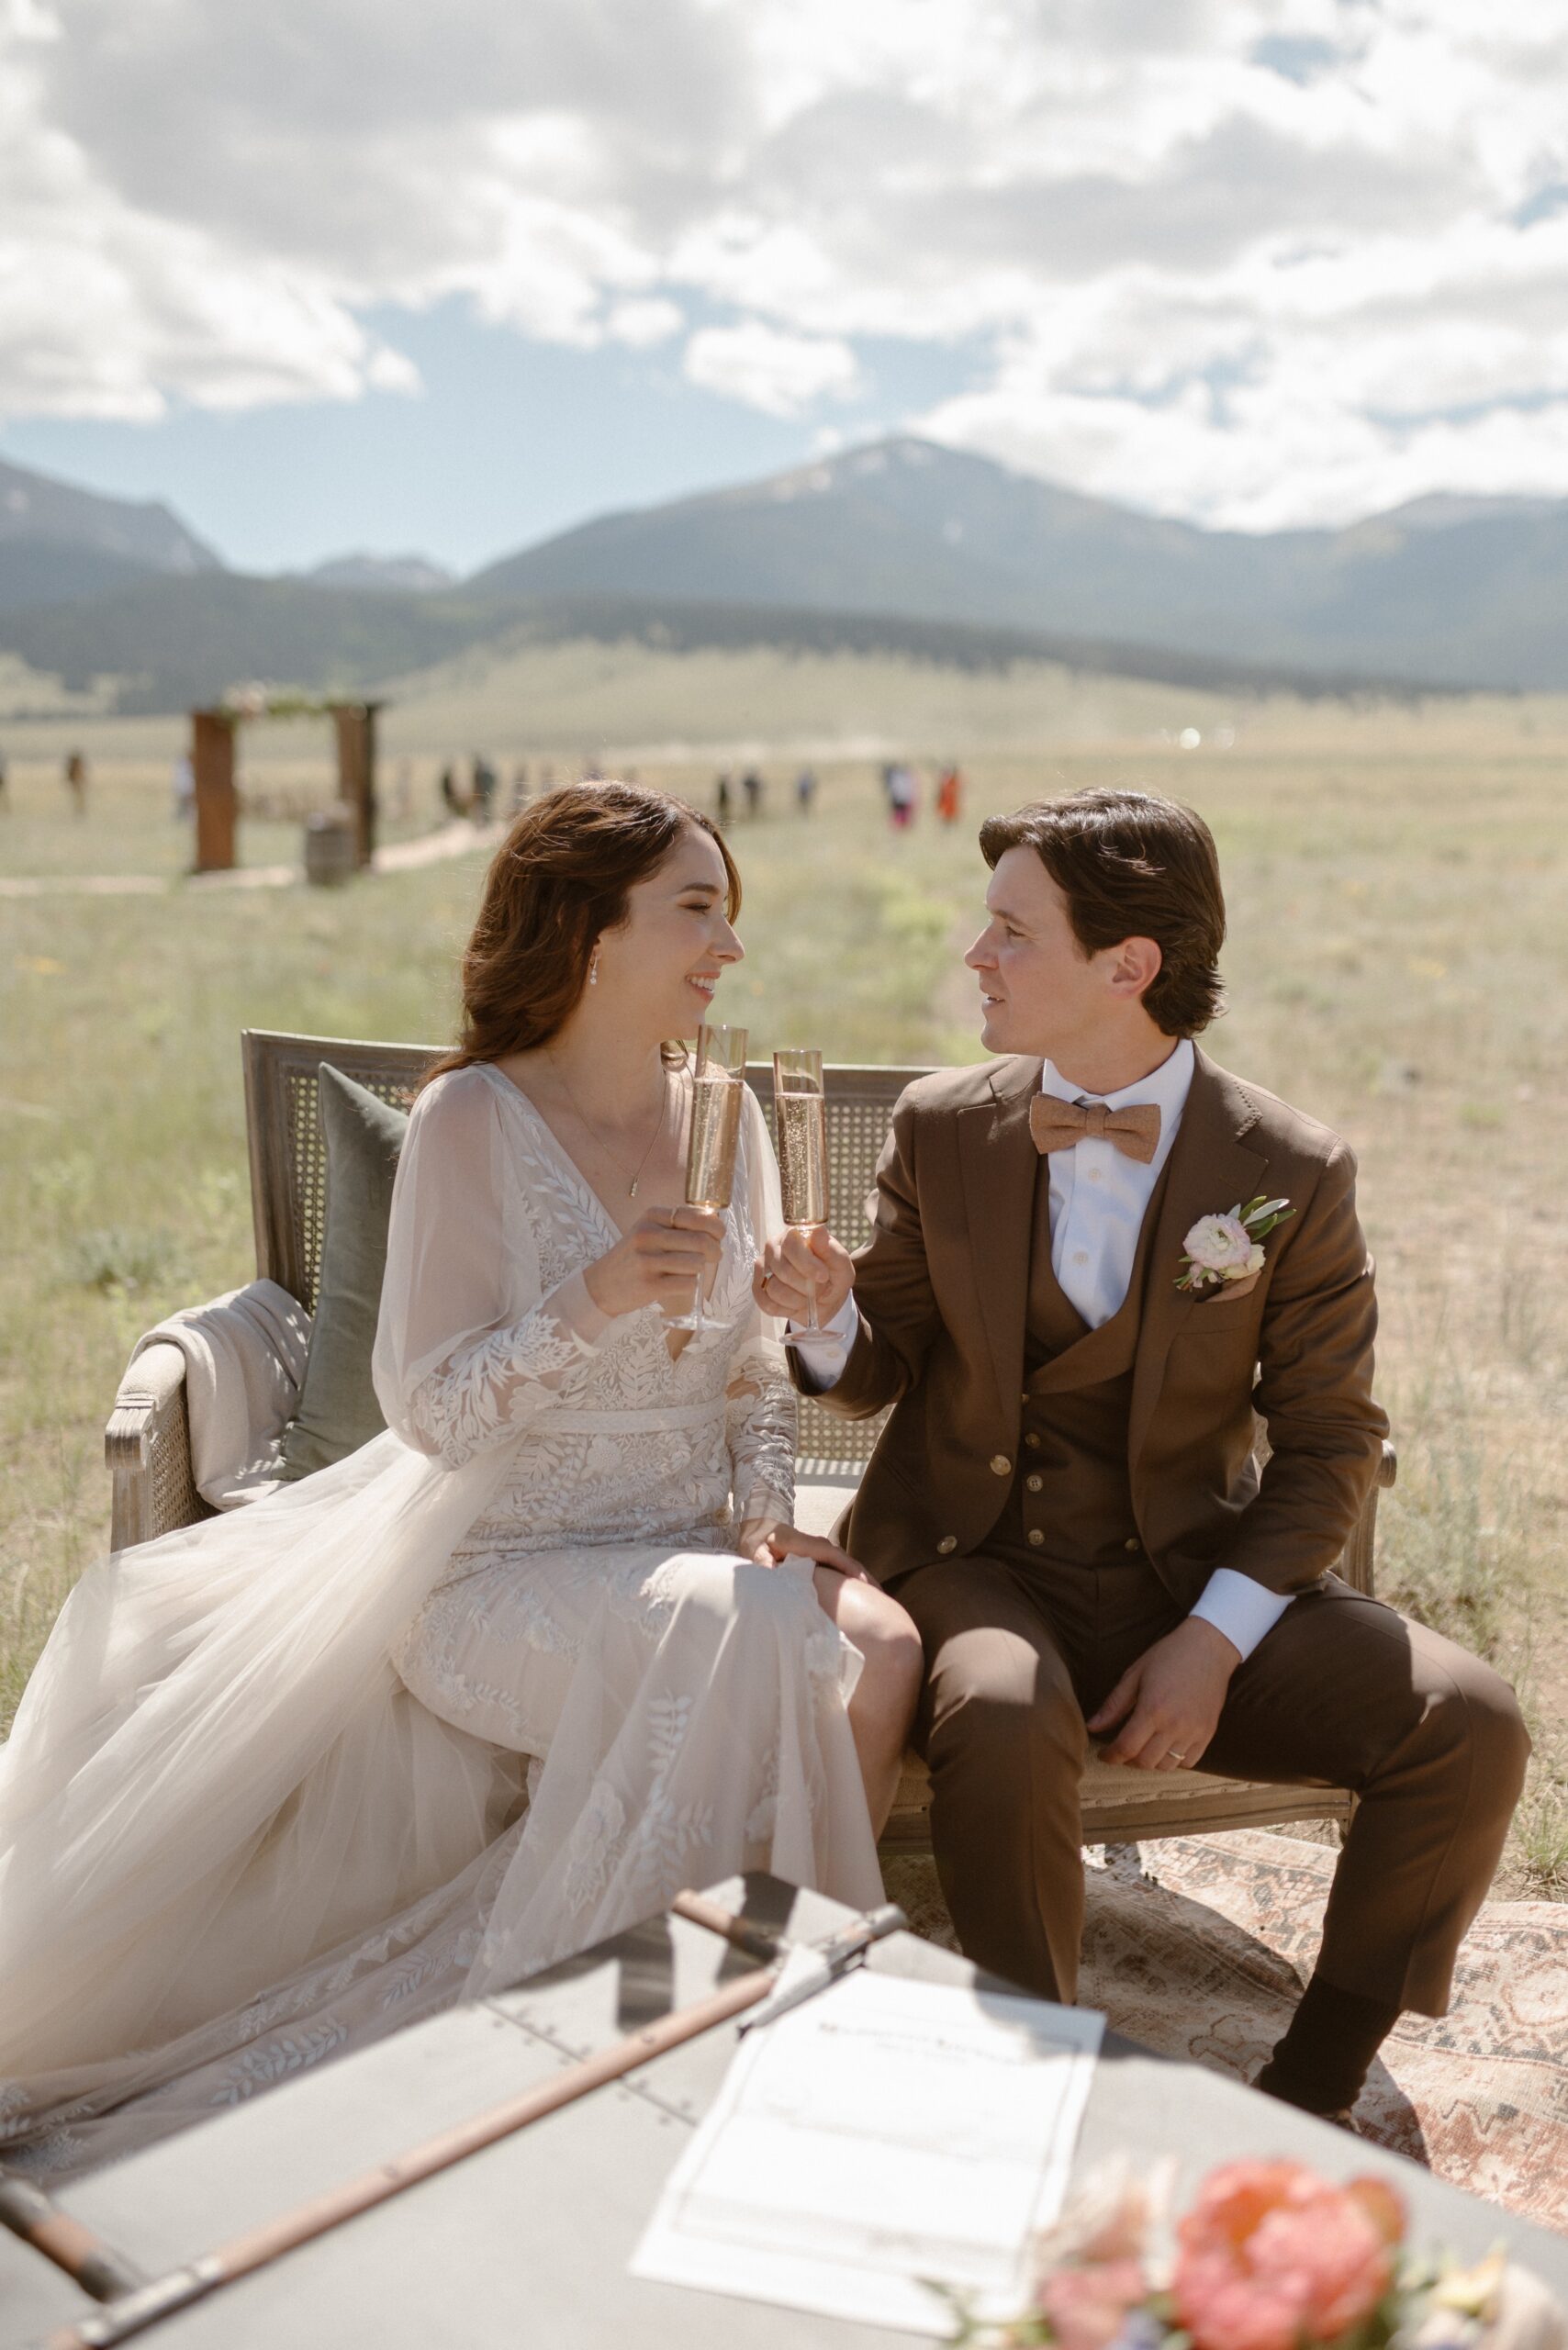 A married couple drinks champagne while sitting in a on lounge chairs in a grassy field at Three Peaks Ranch. Photo by Colorado wedding photographer Ashley Joyce.